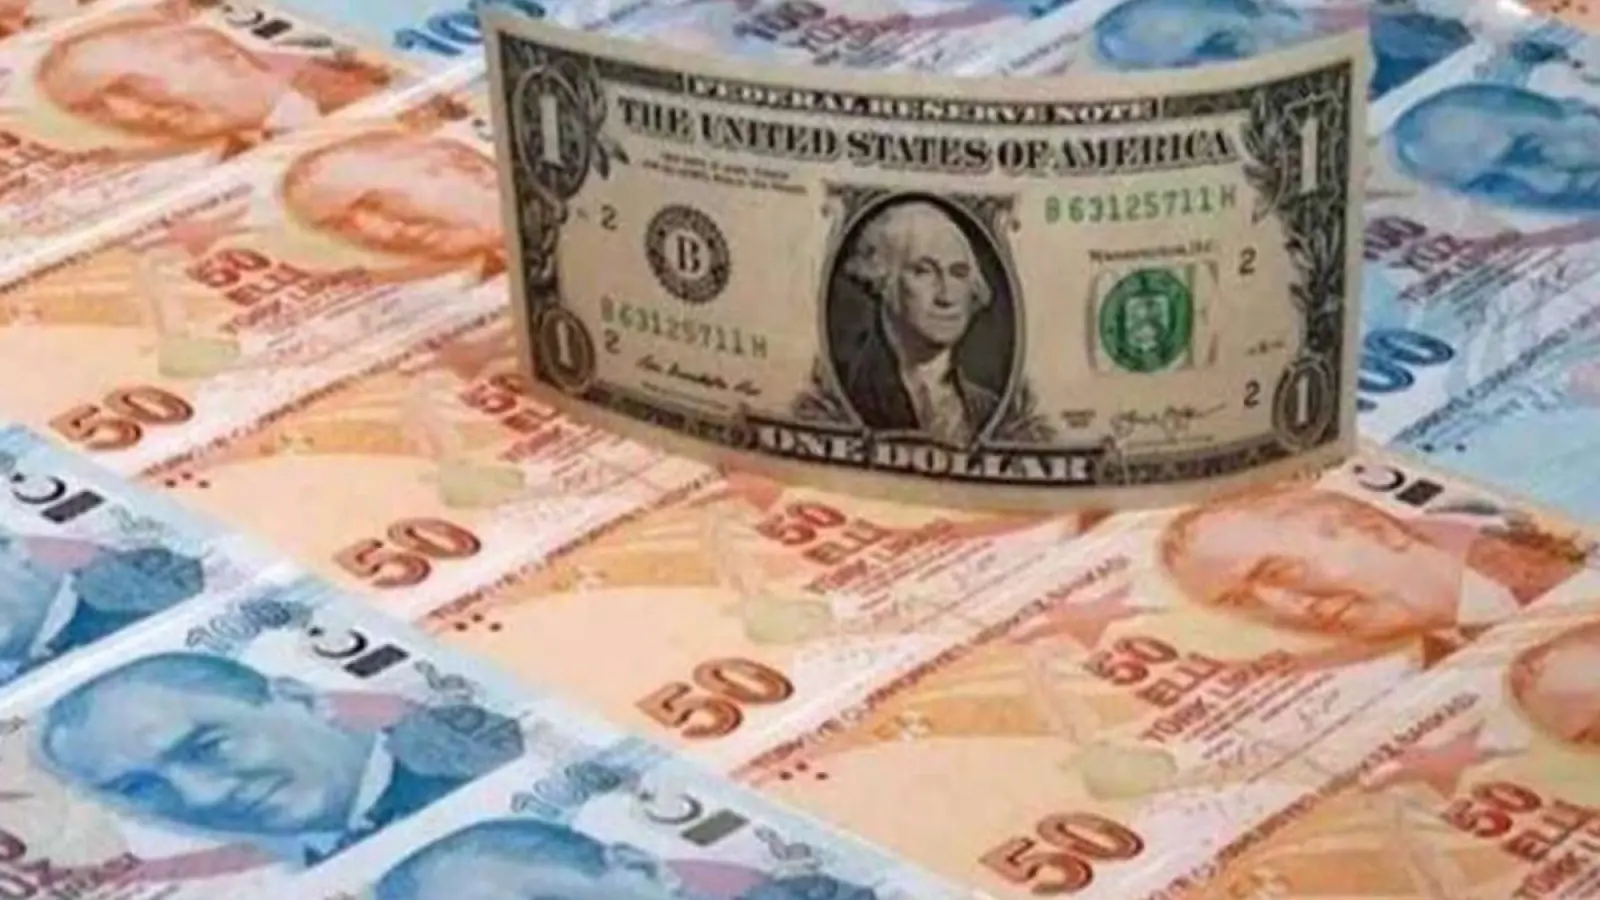 Country's foreign exchange reserves fell by $ 2.92 billion to $ 652.89 billion, data released